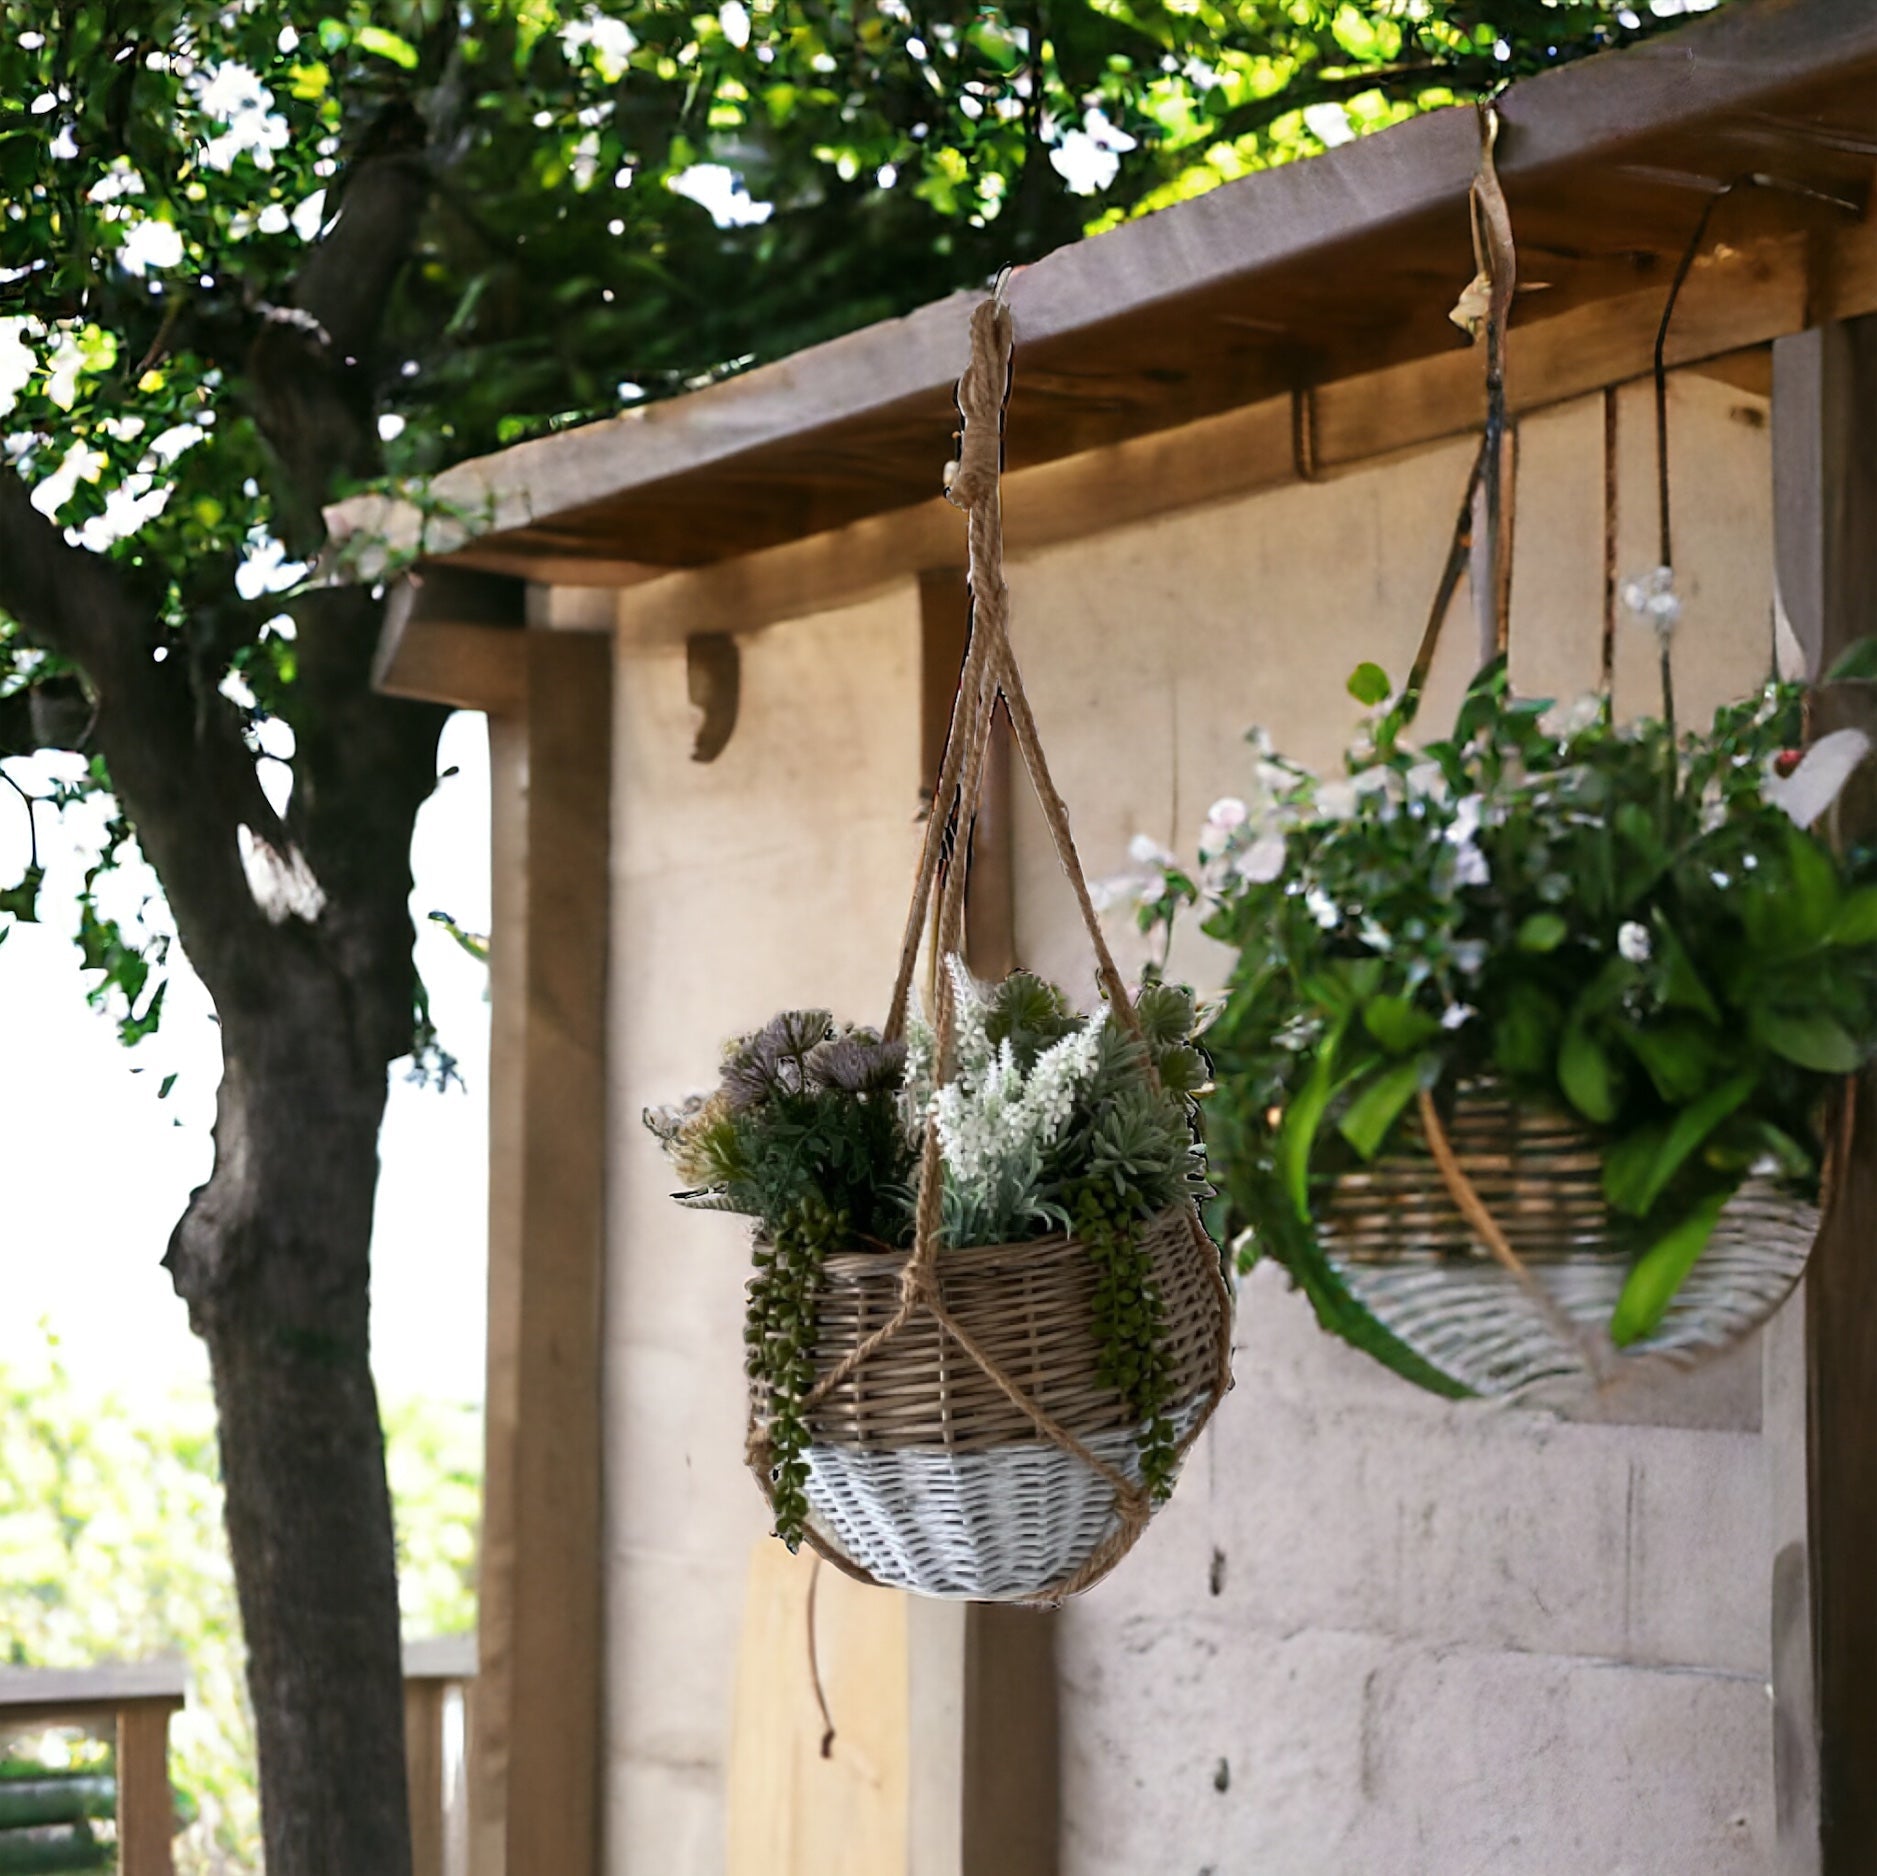 Pot Planter Plant Basket Hanging - The Renmy Store Homewares & Gifts 